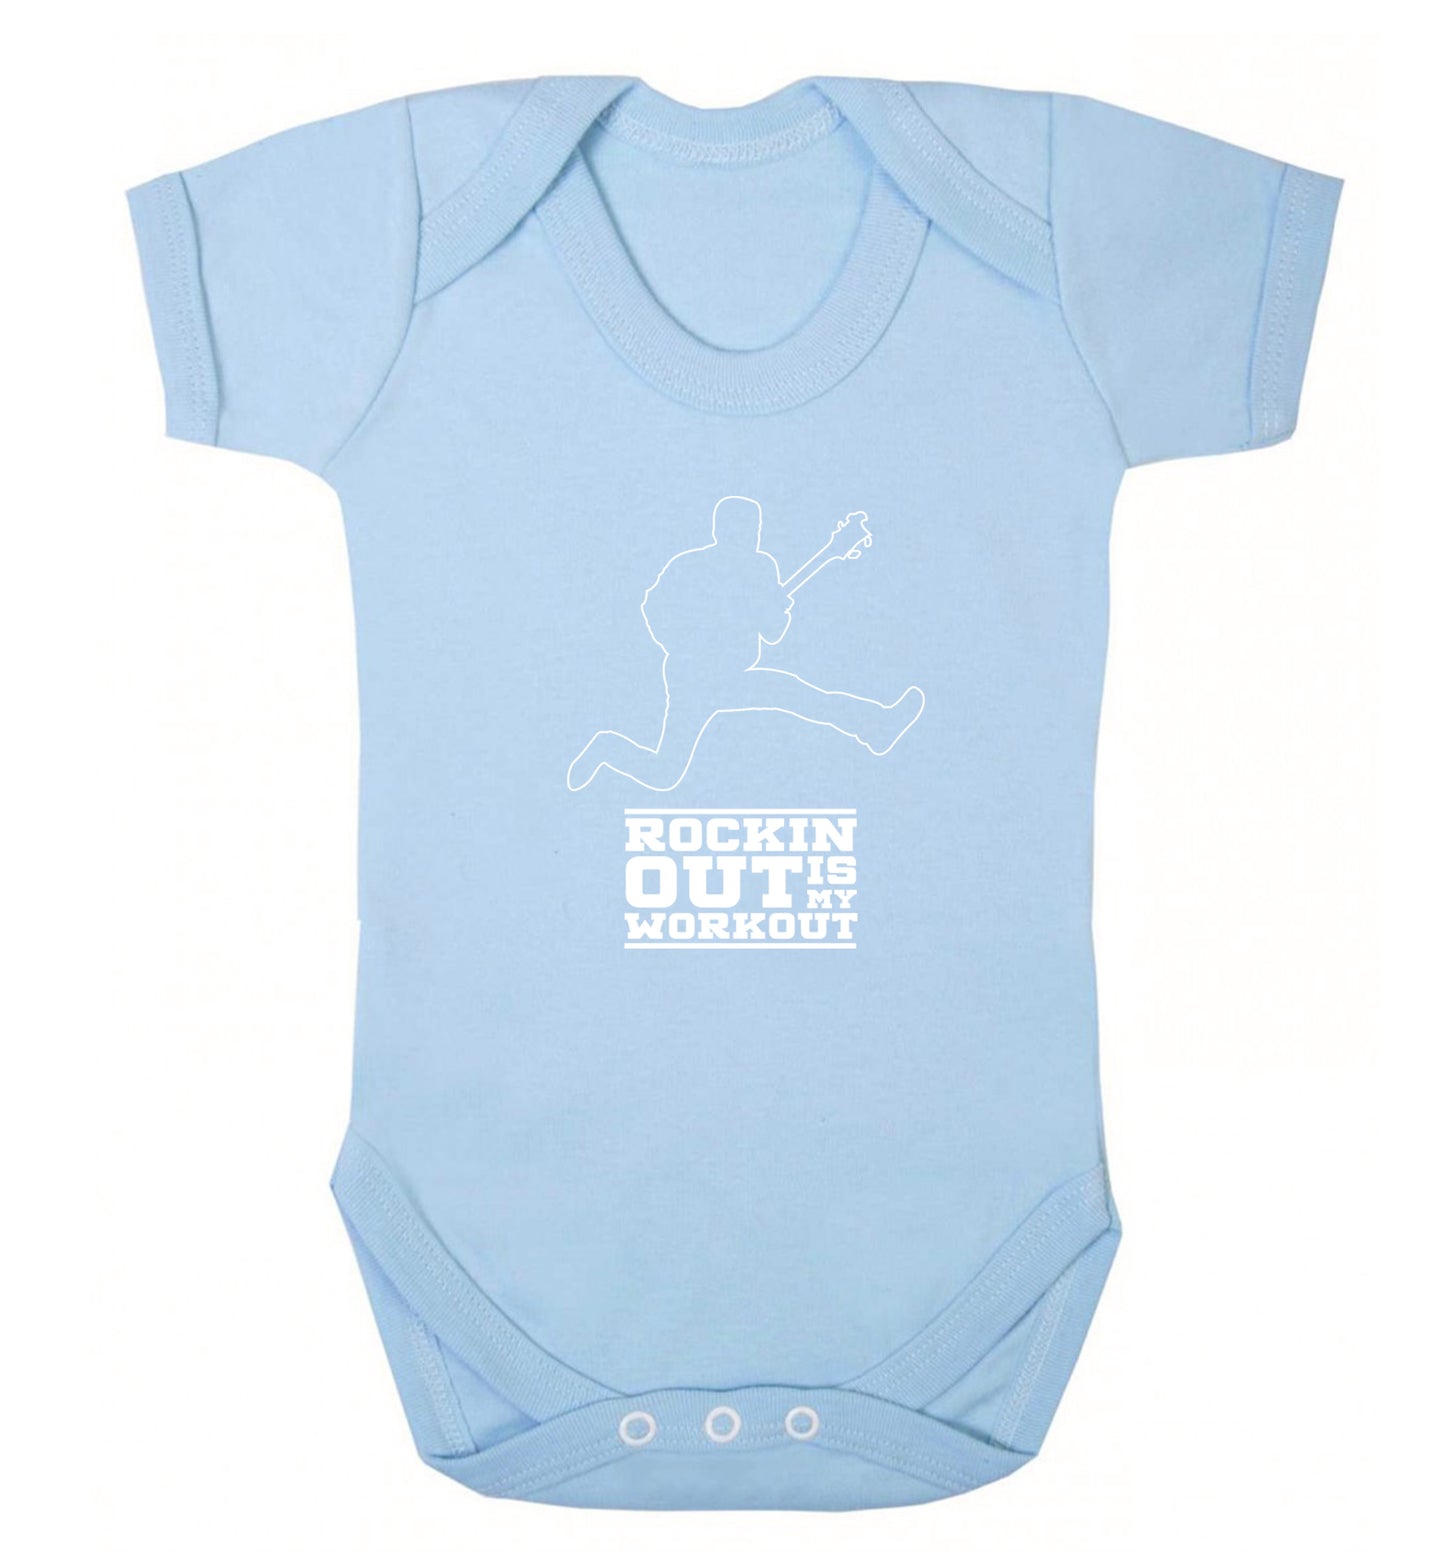 Rockin out is my workout 2 Baby Vest pale blue 18-24 months